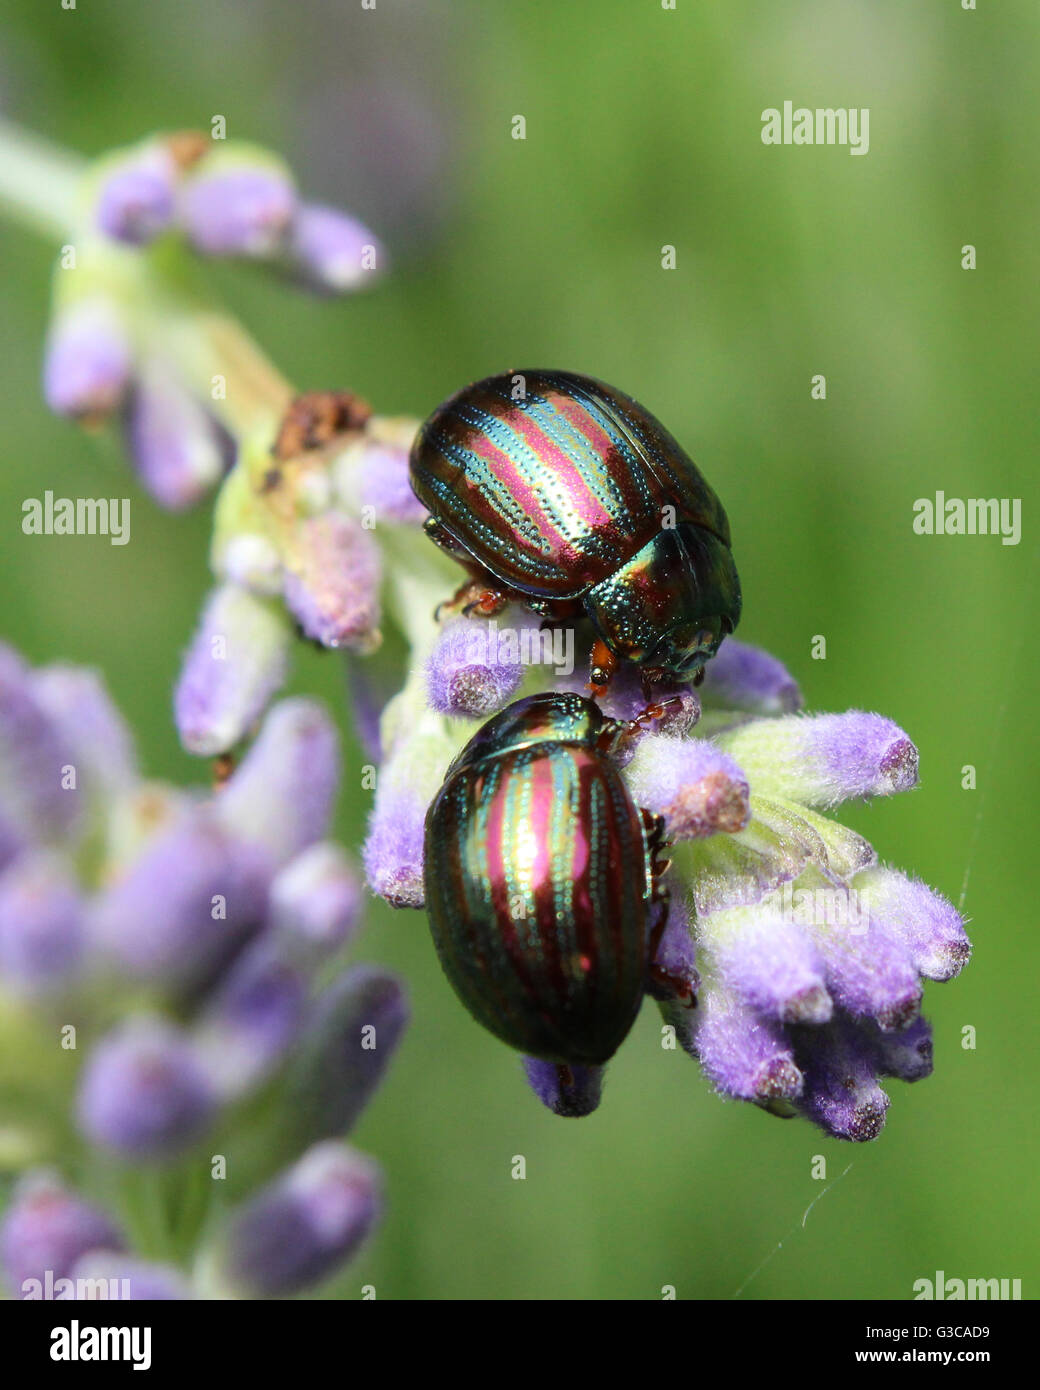 Two Chrysolina americanas, common name rosemary beetle, feeding on the flower of one of its host plants, lavender (Lavendula). Stock Photo